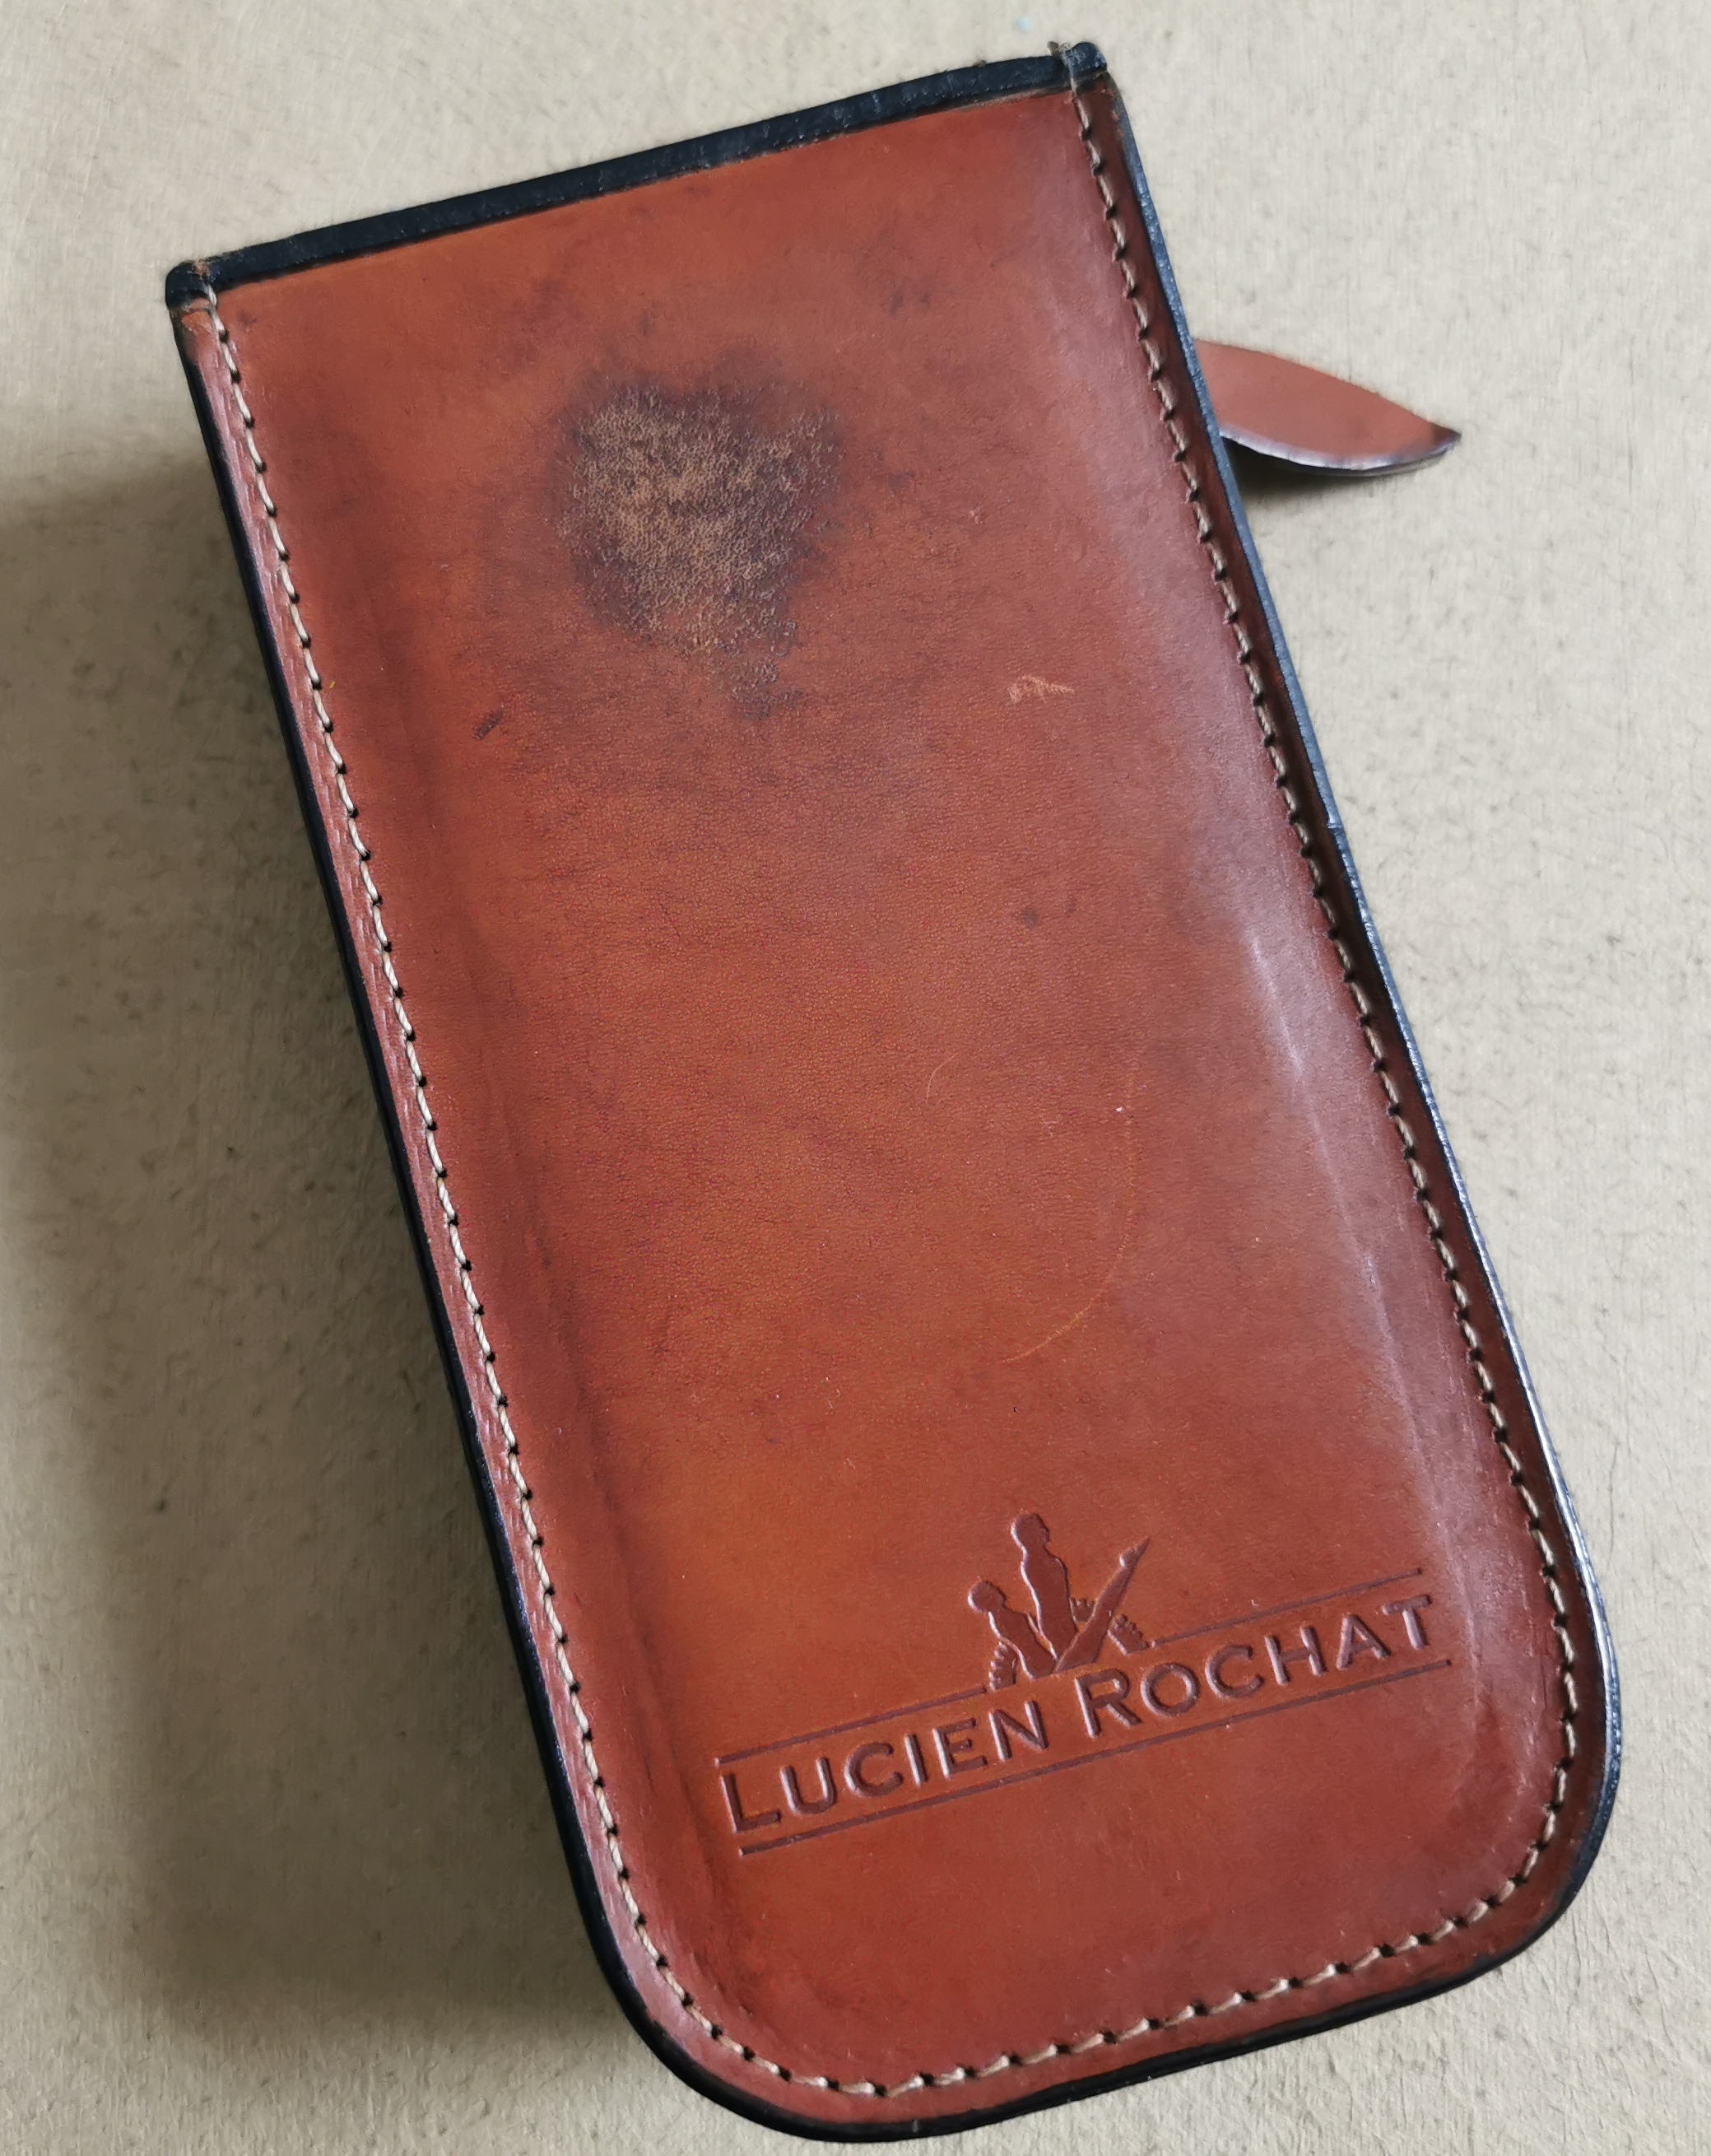 Lucien Rochat vintage leather ligth brown box for two watches in used condition | San Giorgio a Cremano